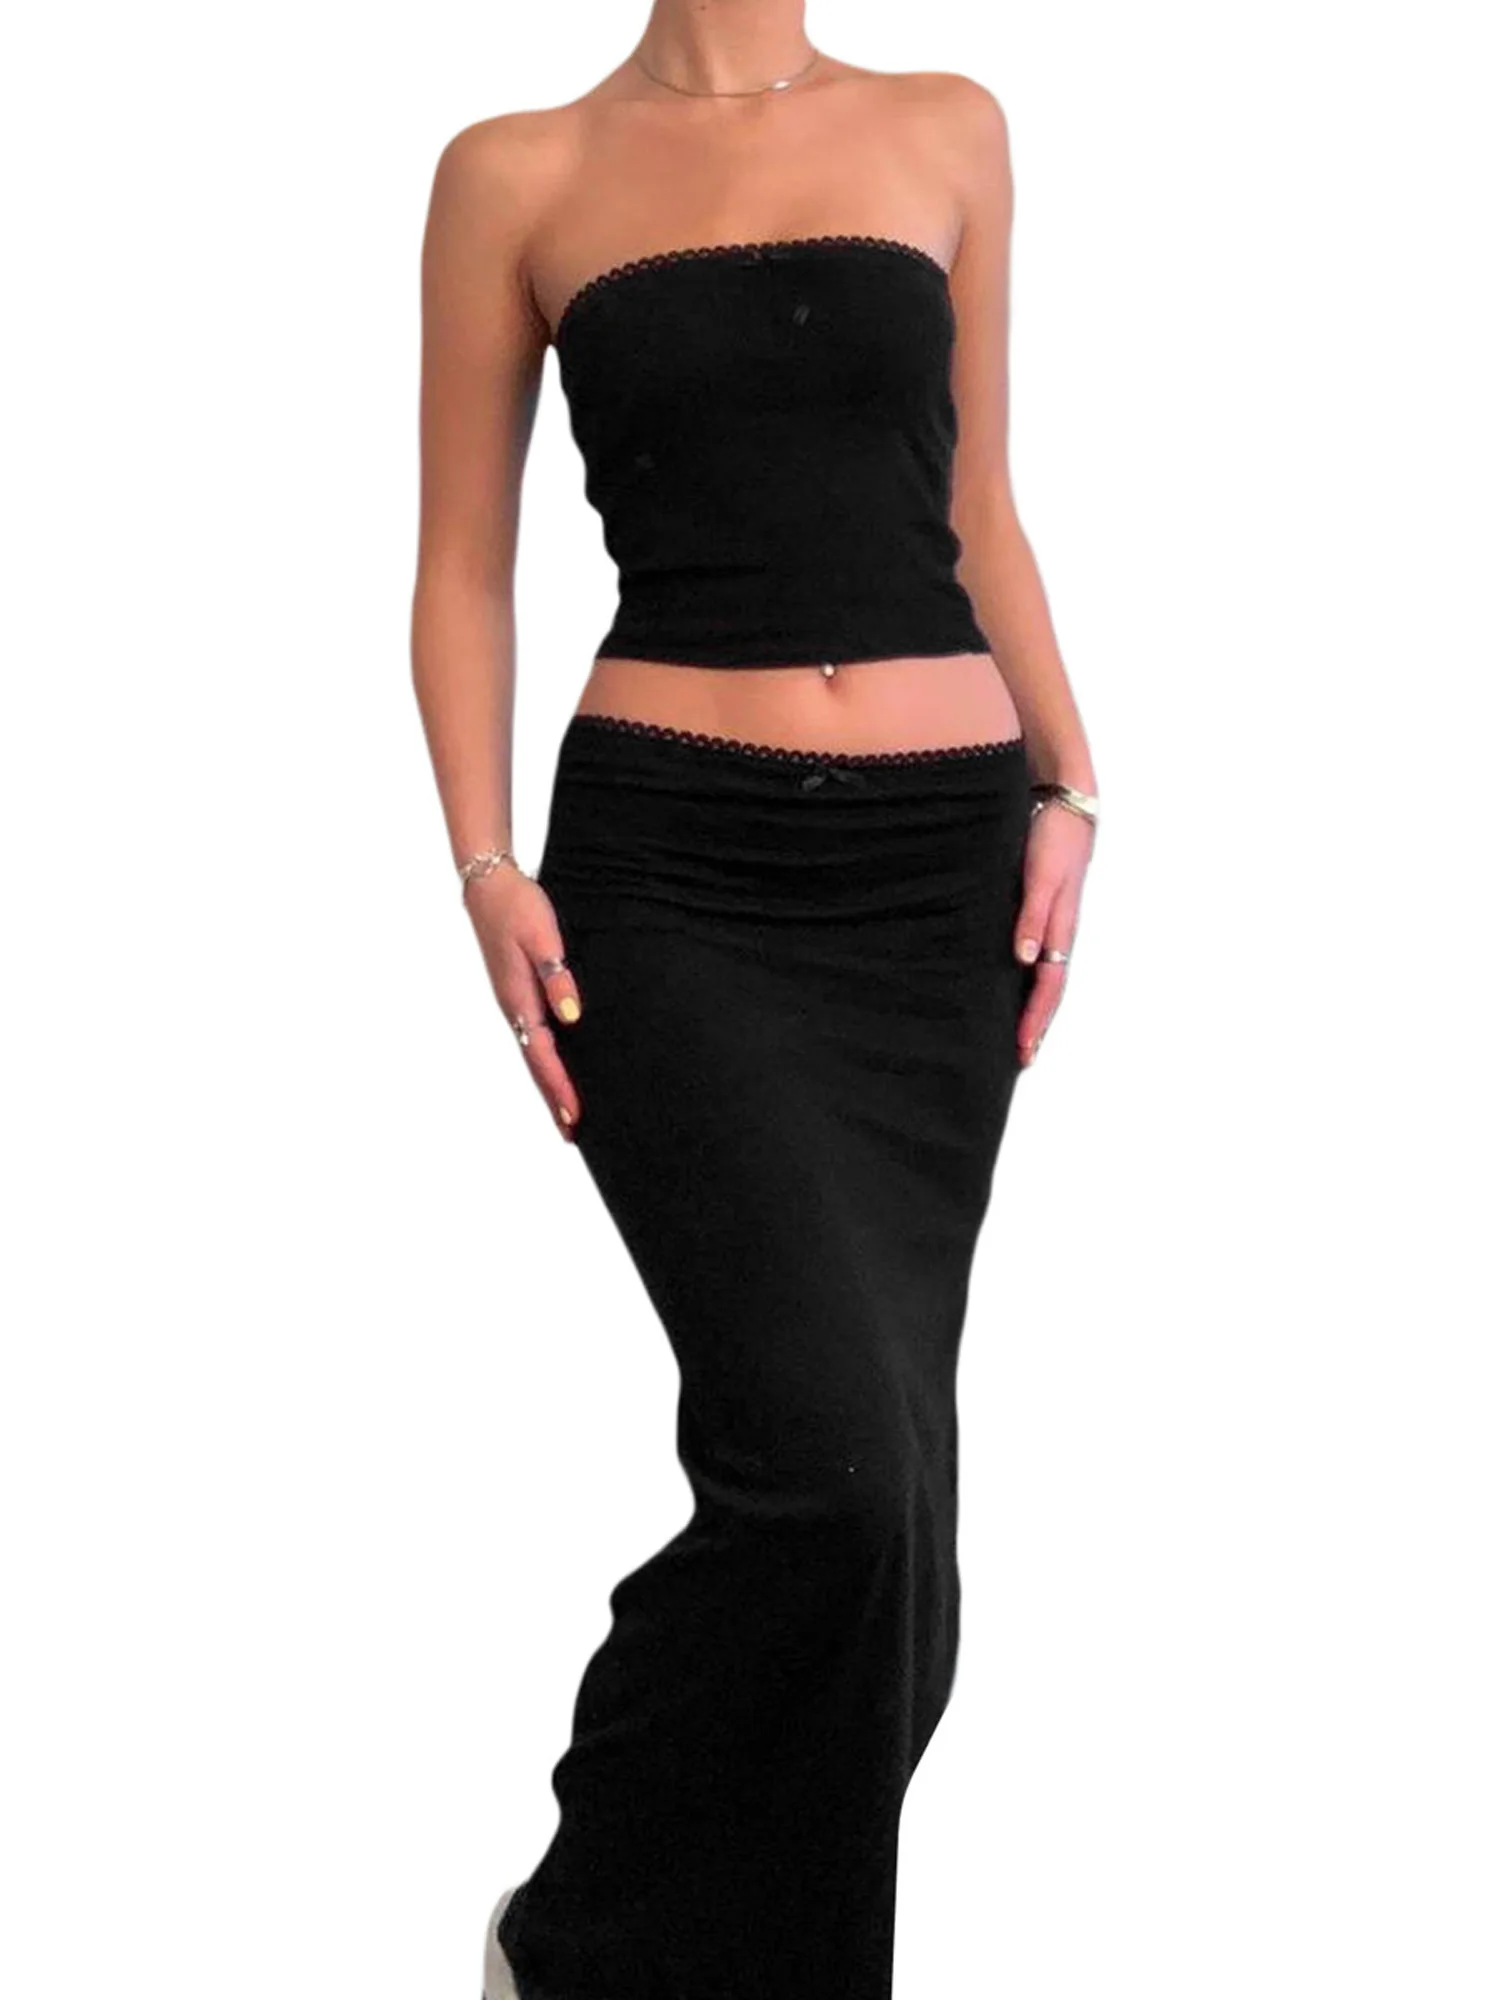 

JBEELATE Women 2 Piece Skirt Sets Elegant Solid Color Backless Camisole with Low Waist Wrap Maxi Skirt Summer Outfit Ca Black